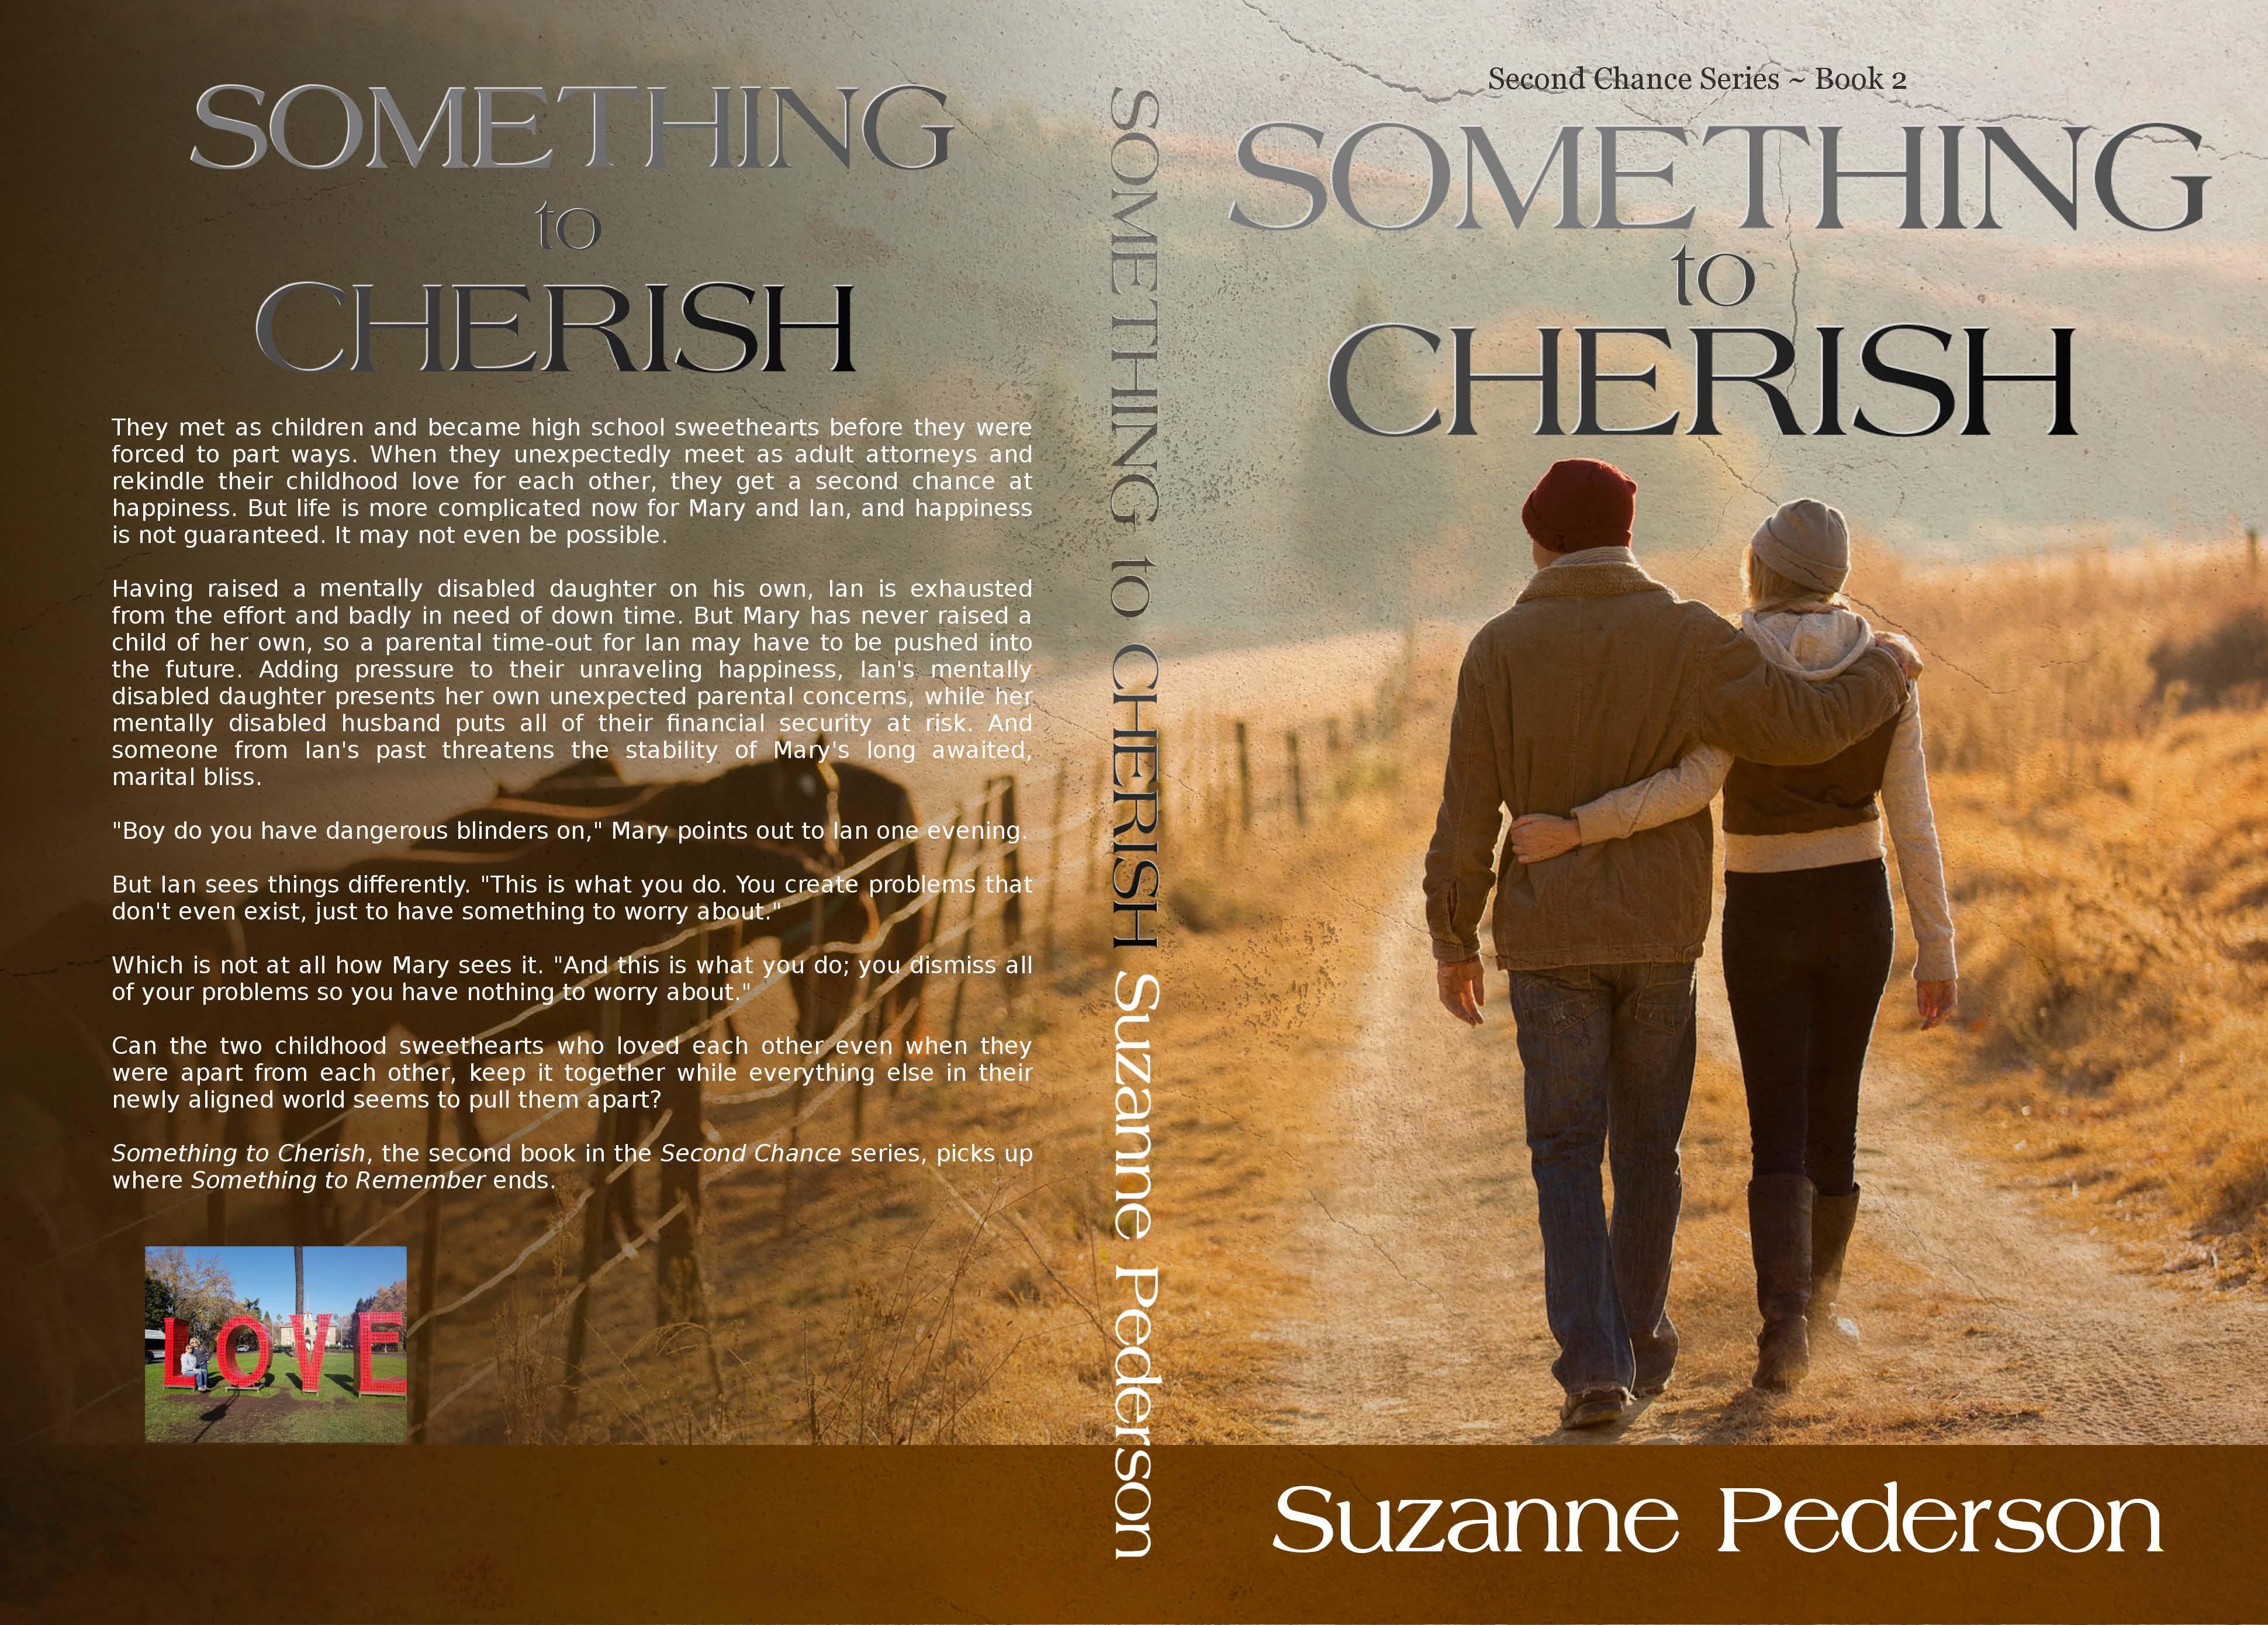 Something to Cherish - Book 2 in the Second Chance series